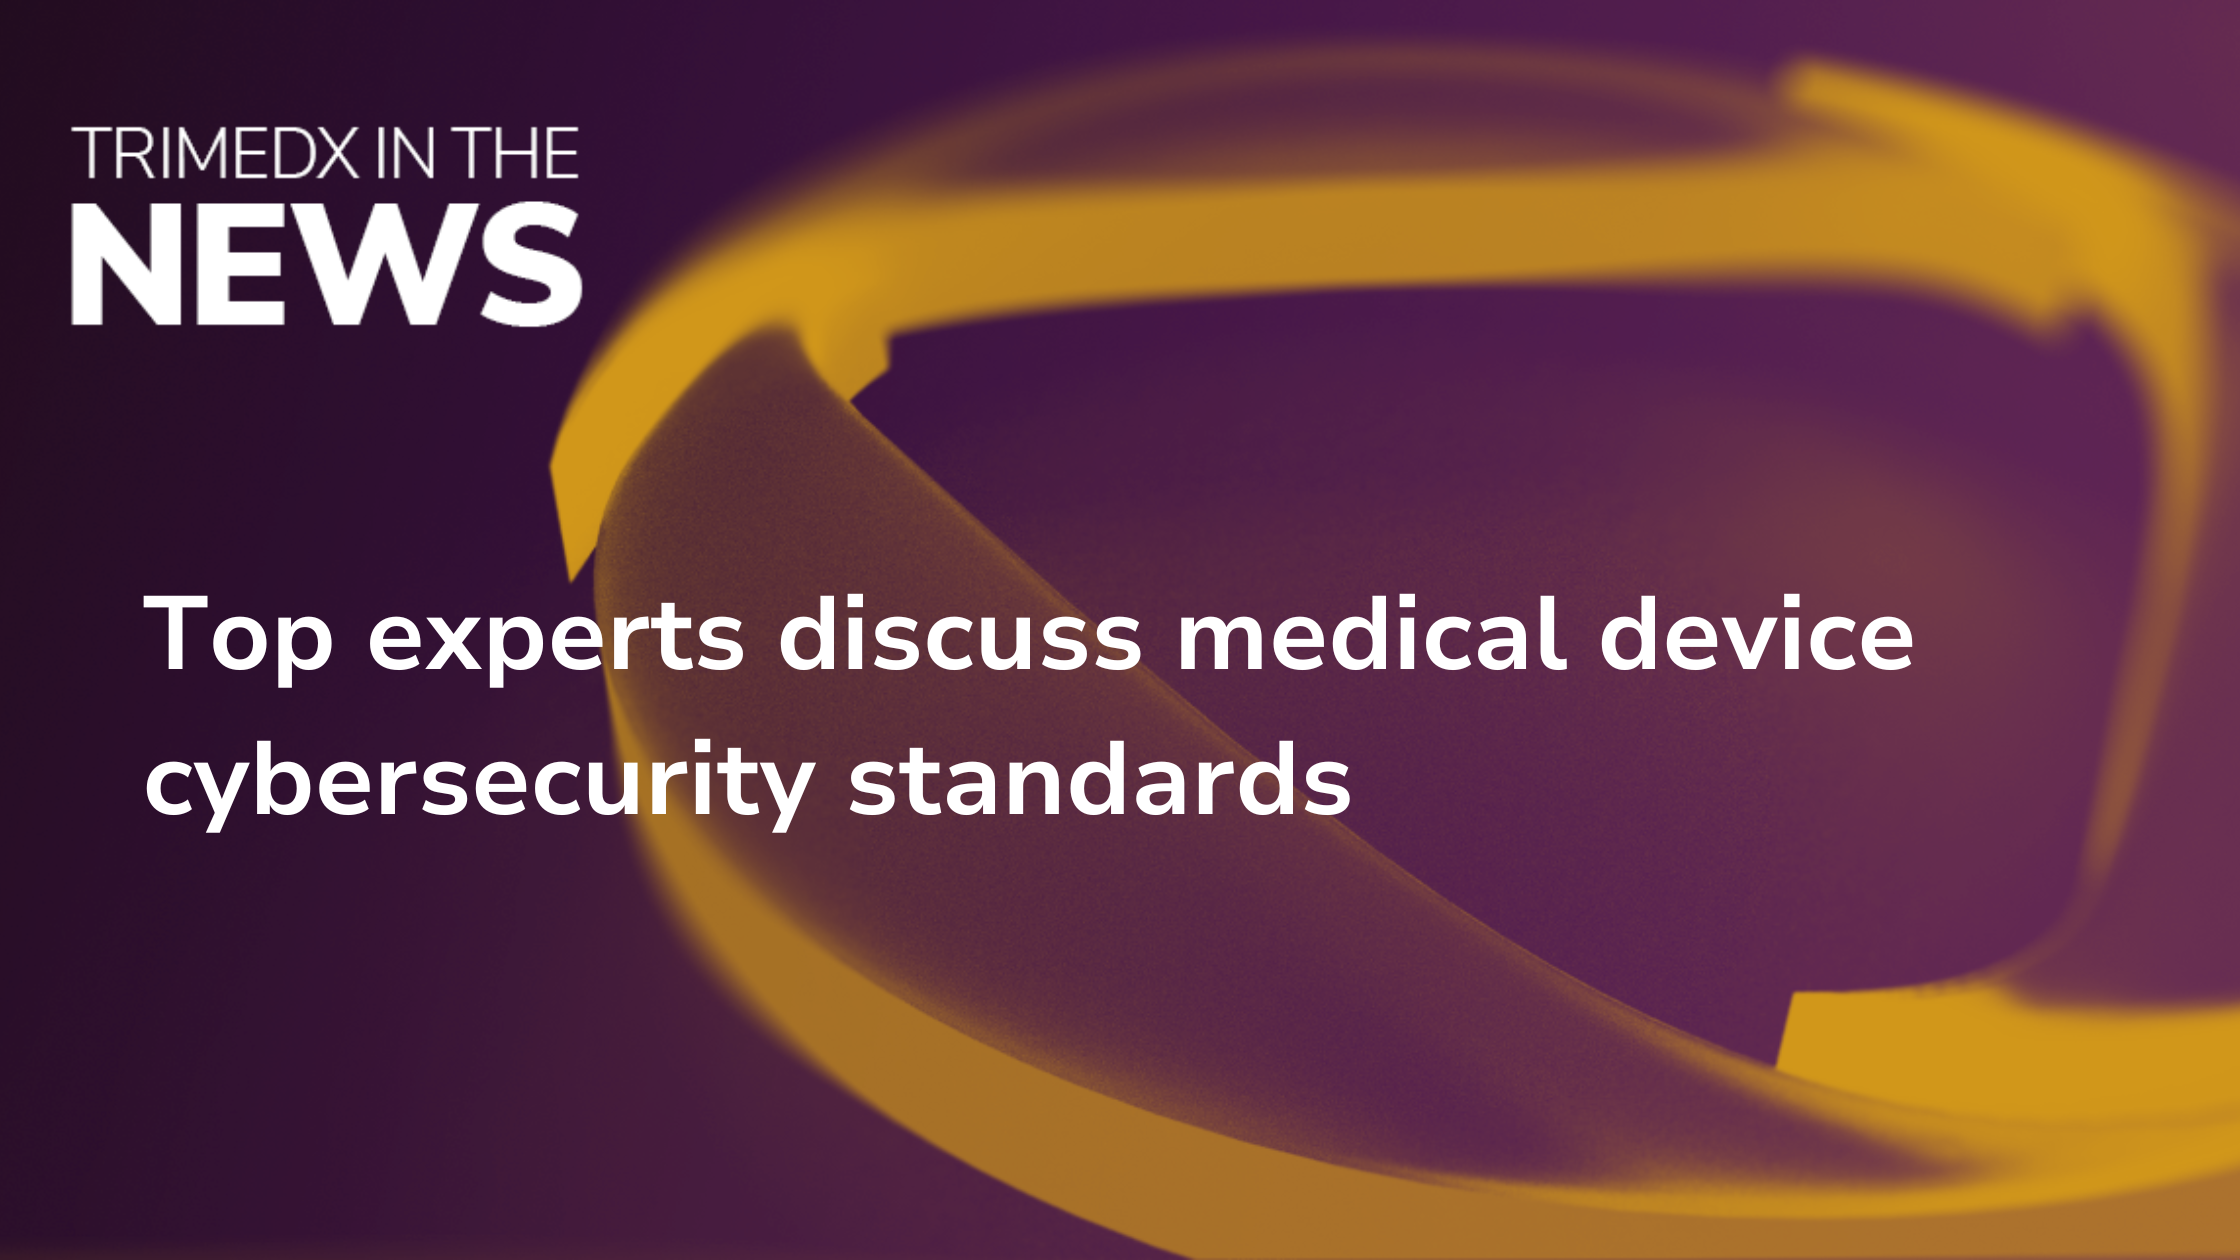 TRIMEDX in the news - Top experts discuss medical device cybersecurity standards